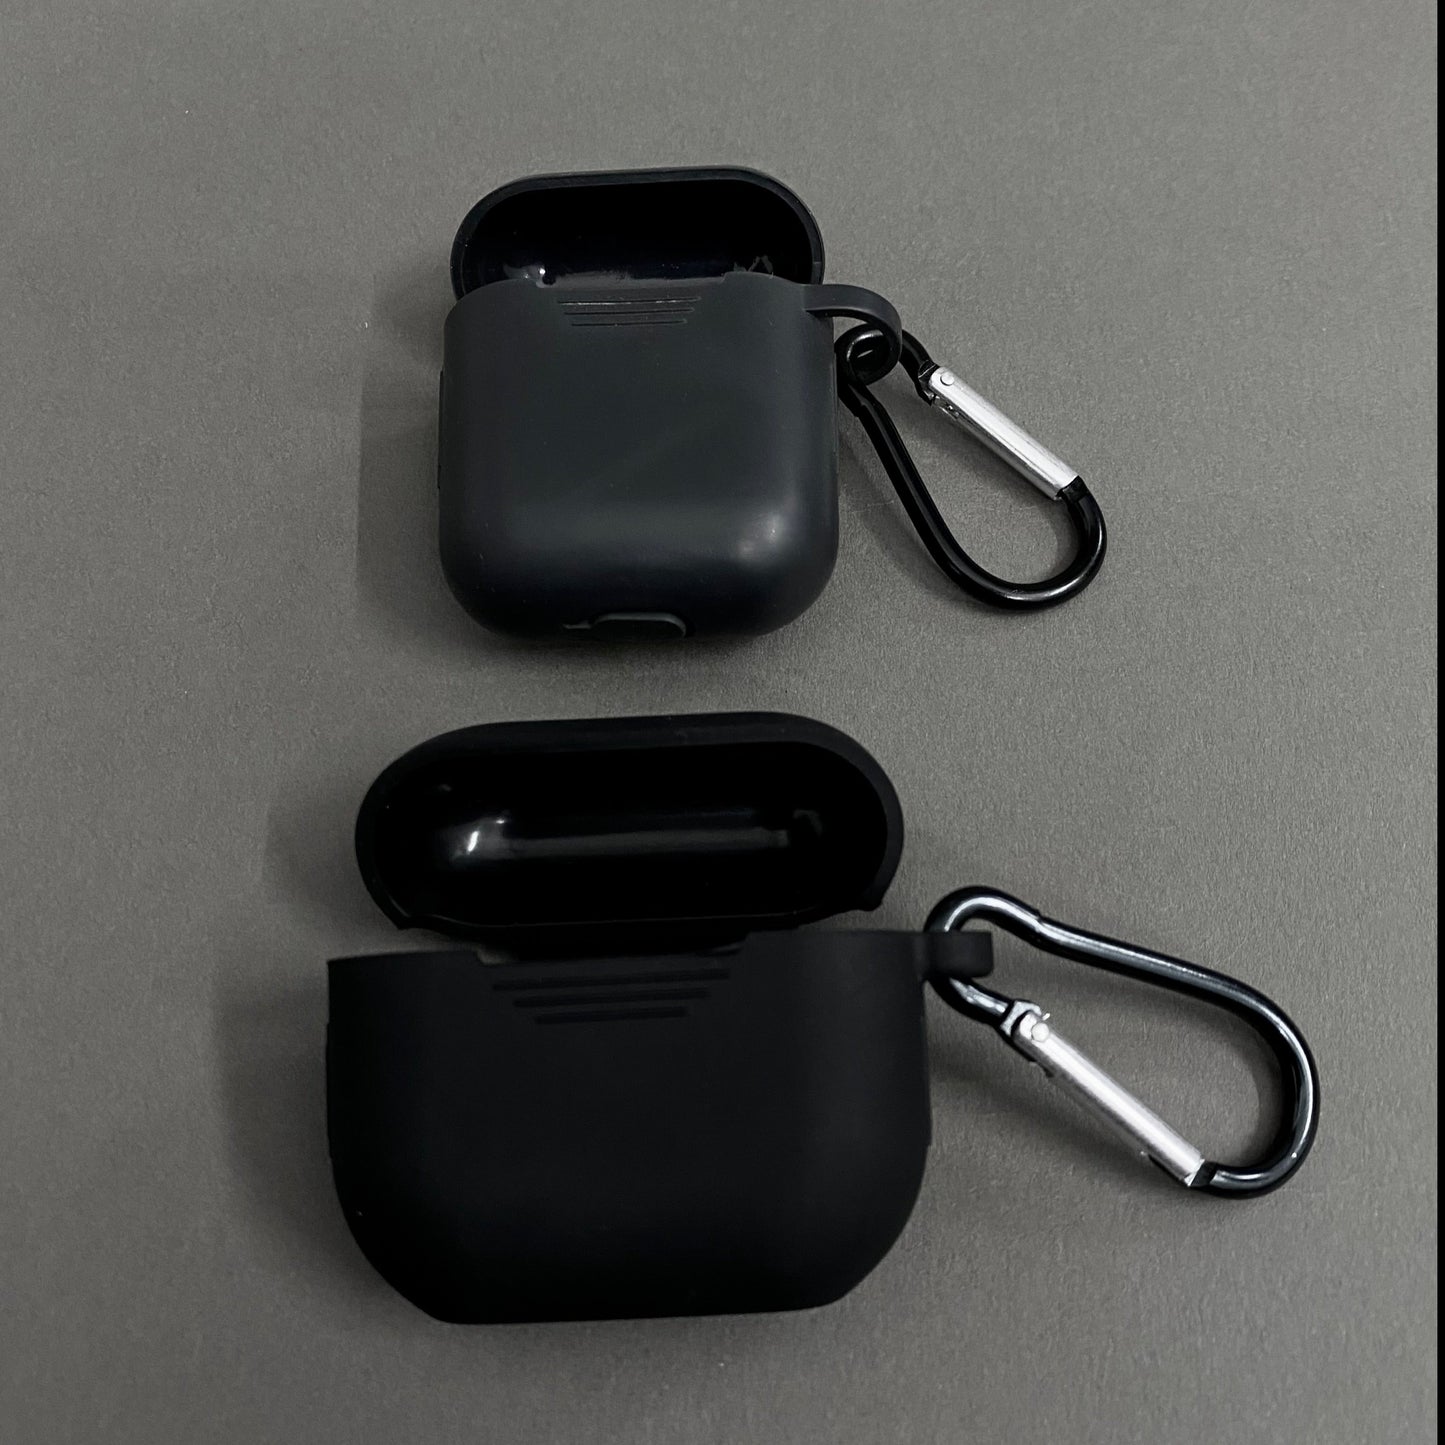 The Black Apple Airpods Case